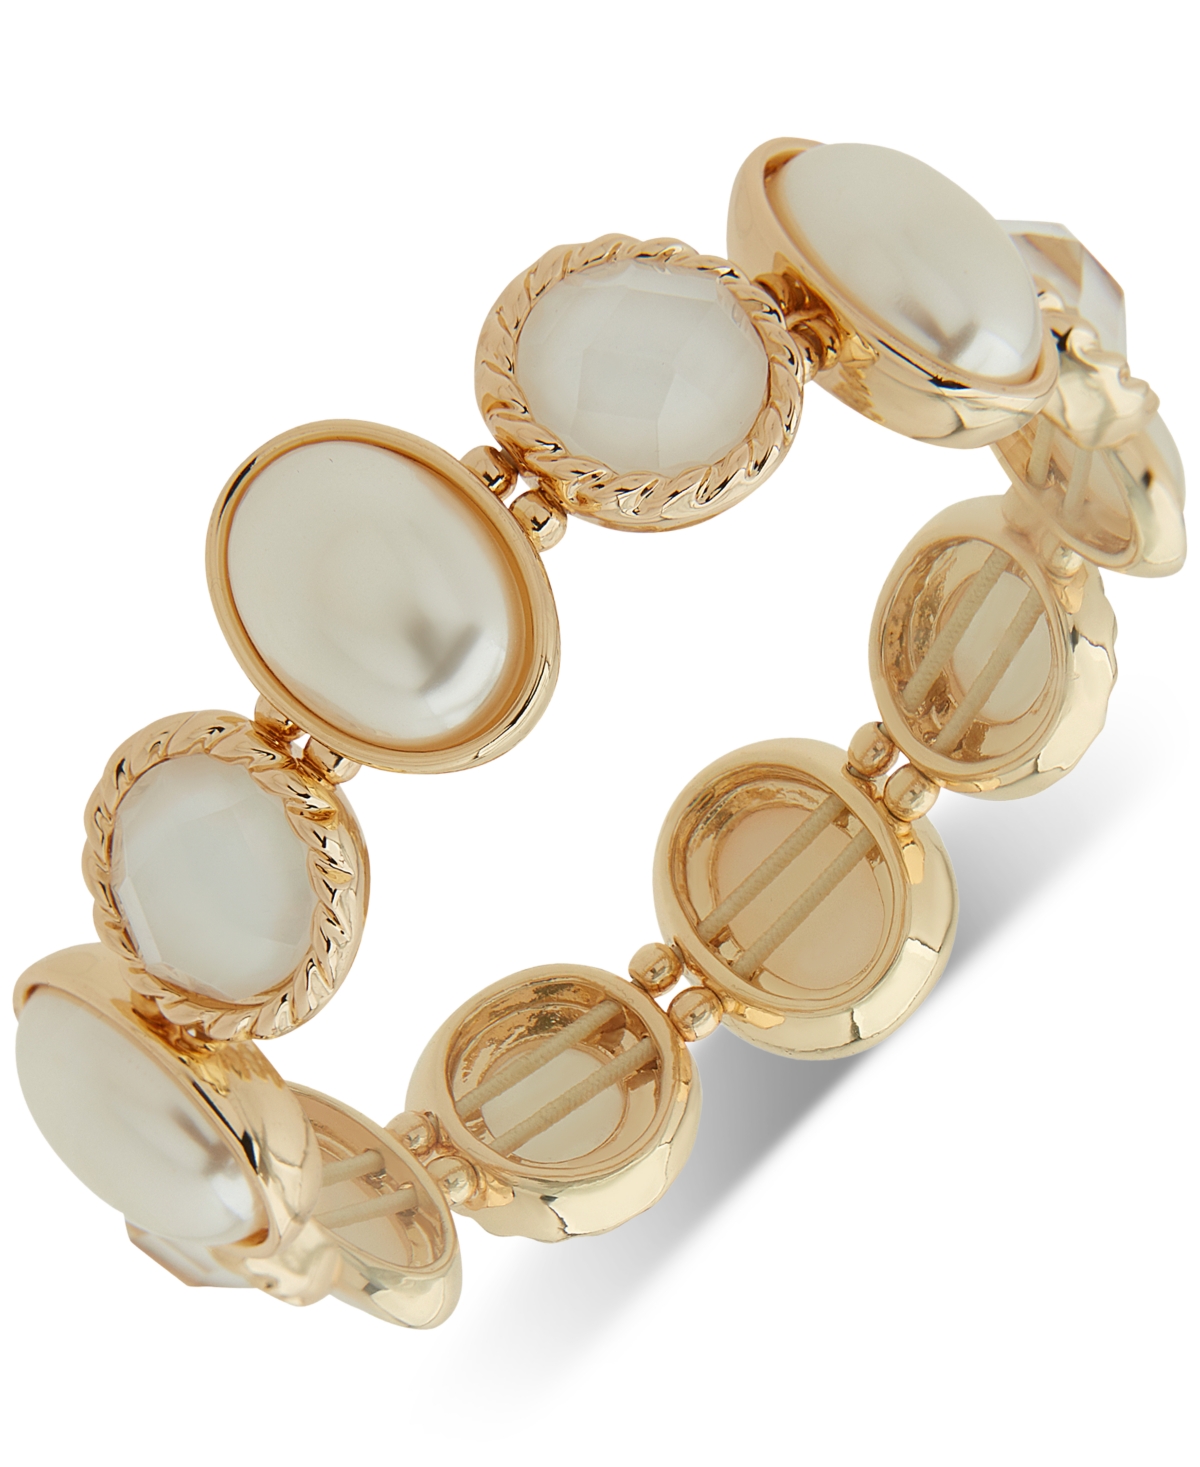 Gold-Tone White Stone & Mother-of-Pearl Stretch Bracelet - Pearl